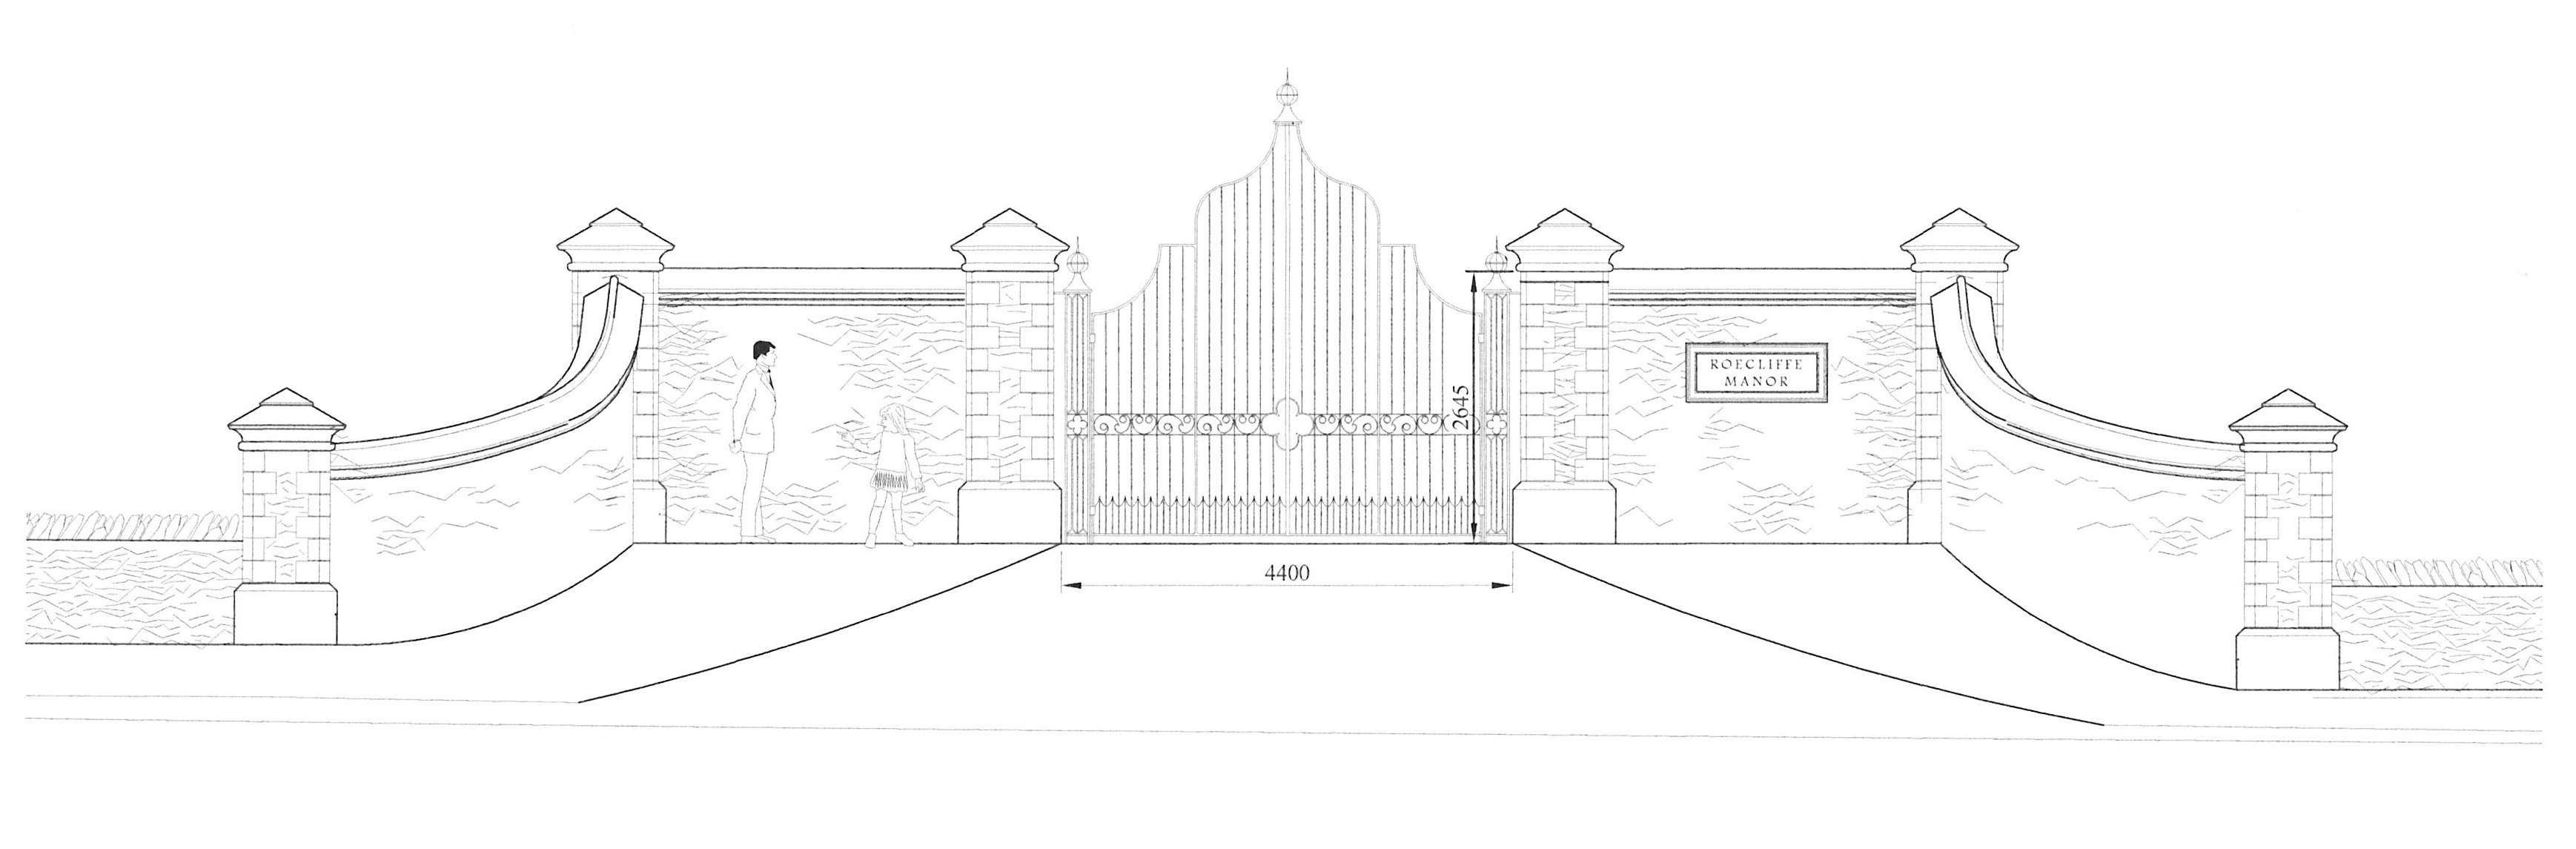 Concept sketch elevation for new entrance gates at Roecliffe Hall by Peter Eustance